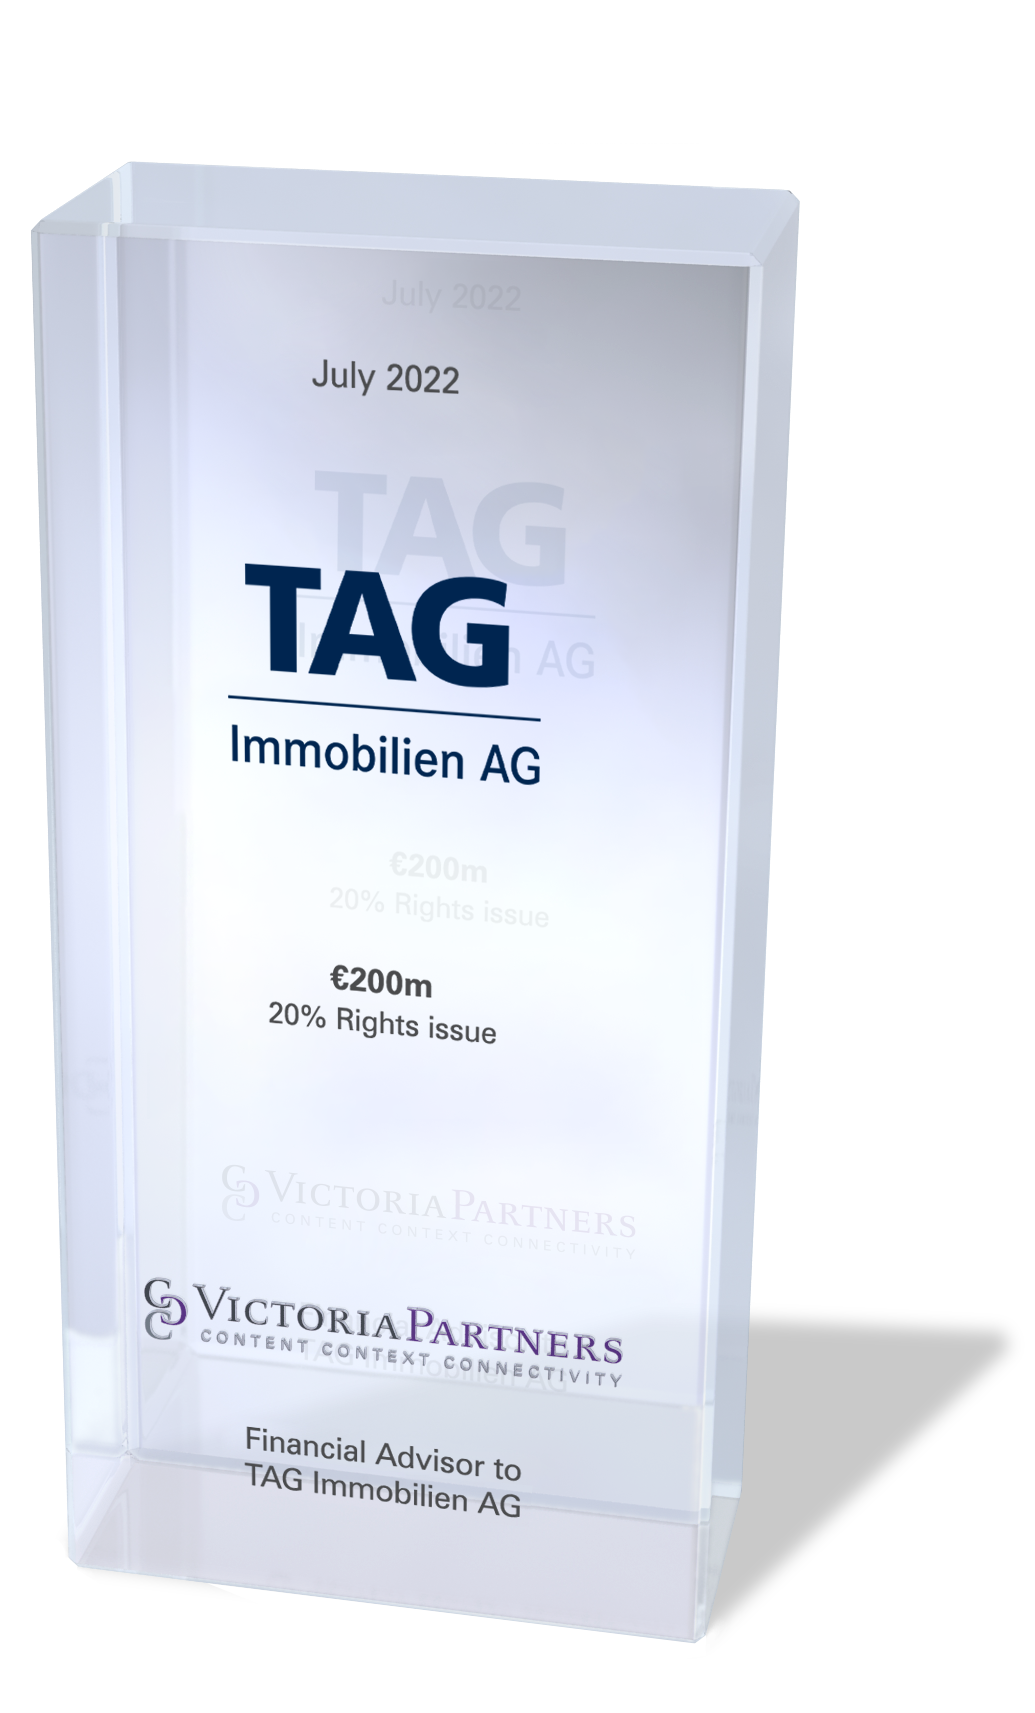 VICTORIAPARTNERS - Financial Advisor to TAG Immobilien AG - July 2022